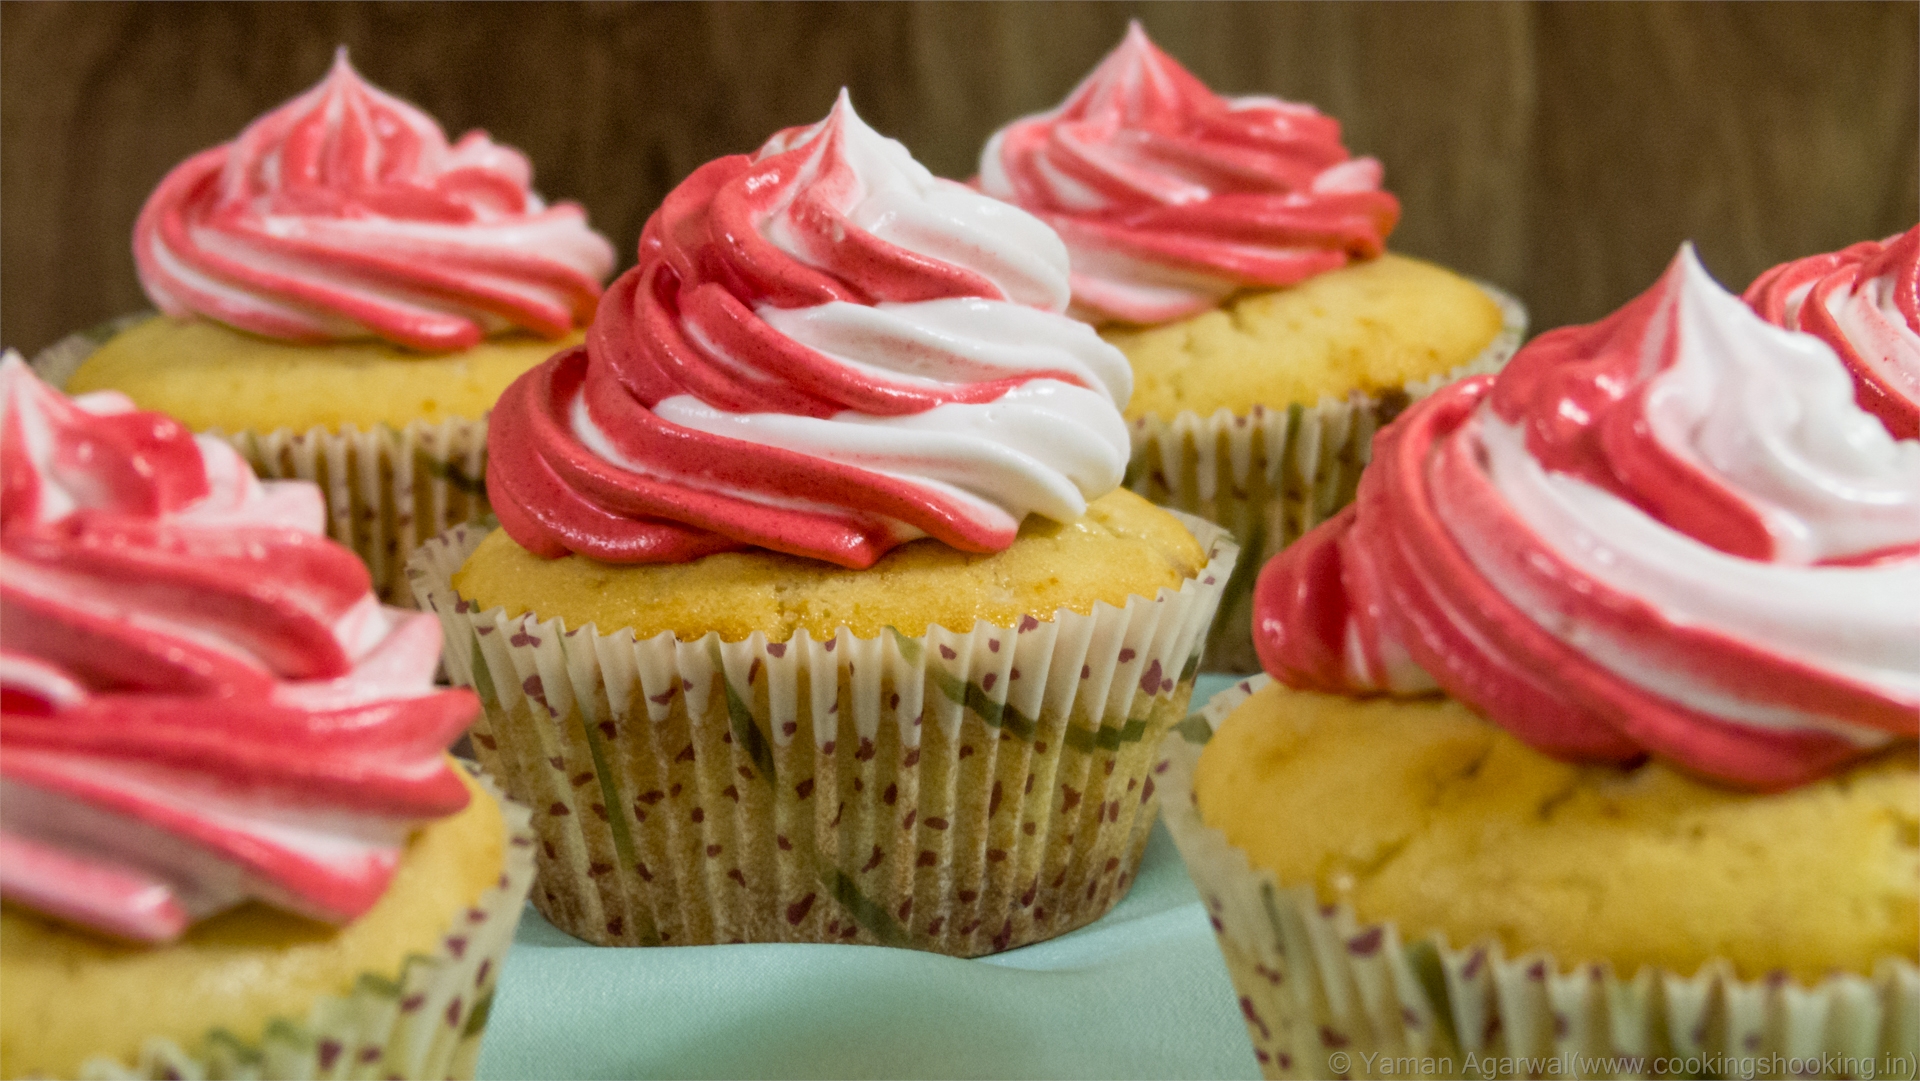 Vanilla Cupcakes Recipe | With Cherries Inside, Cooker Cupcakes | Eggless Baking Without Oven